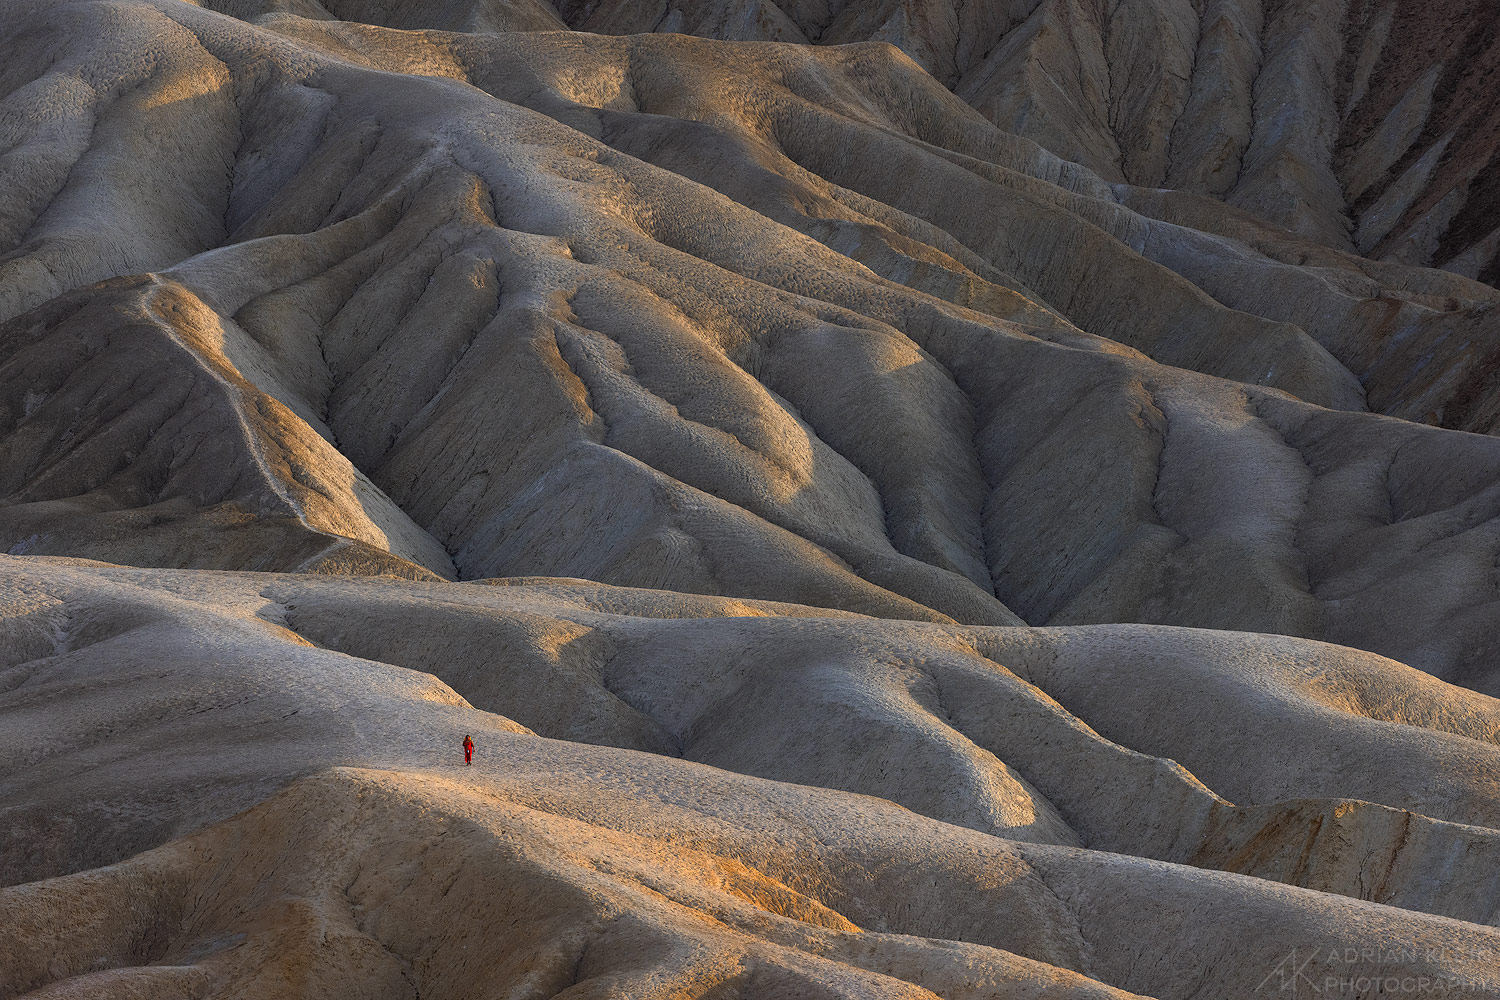 A lone female hiker wearing a red dress taking in the last of the sun as it sets for the day in Death Valley National Park. I...